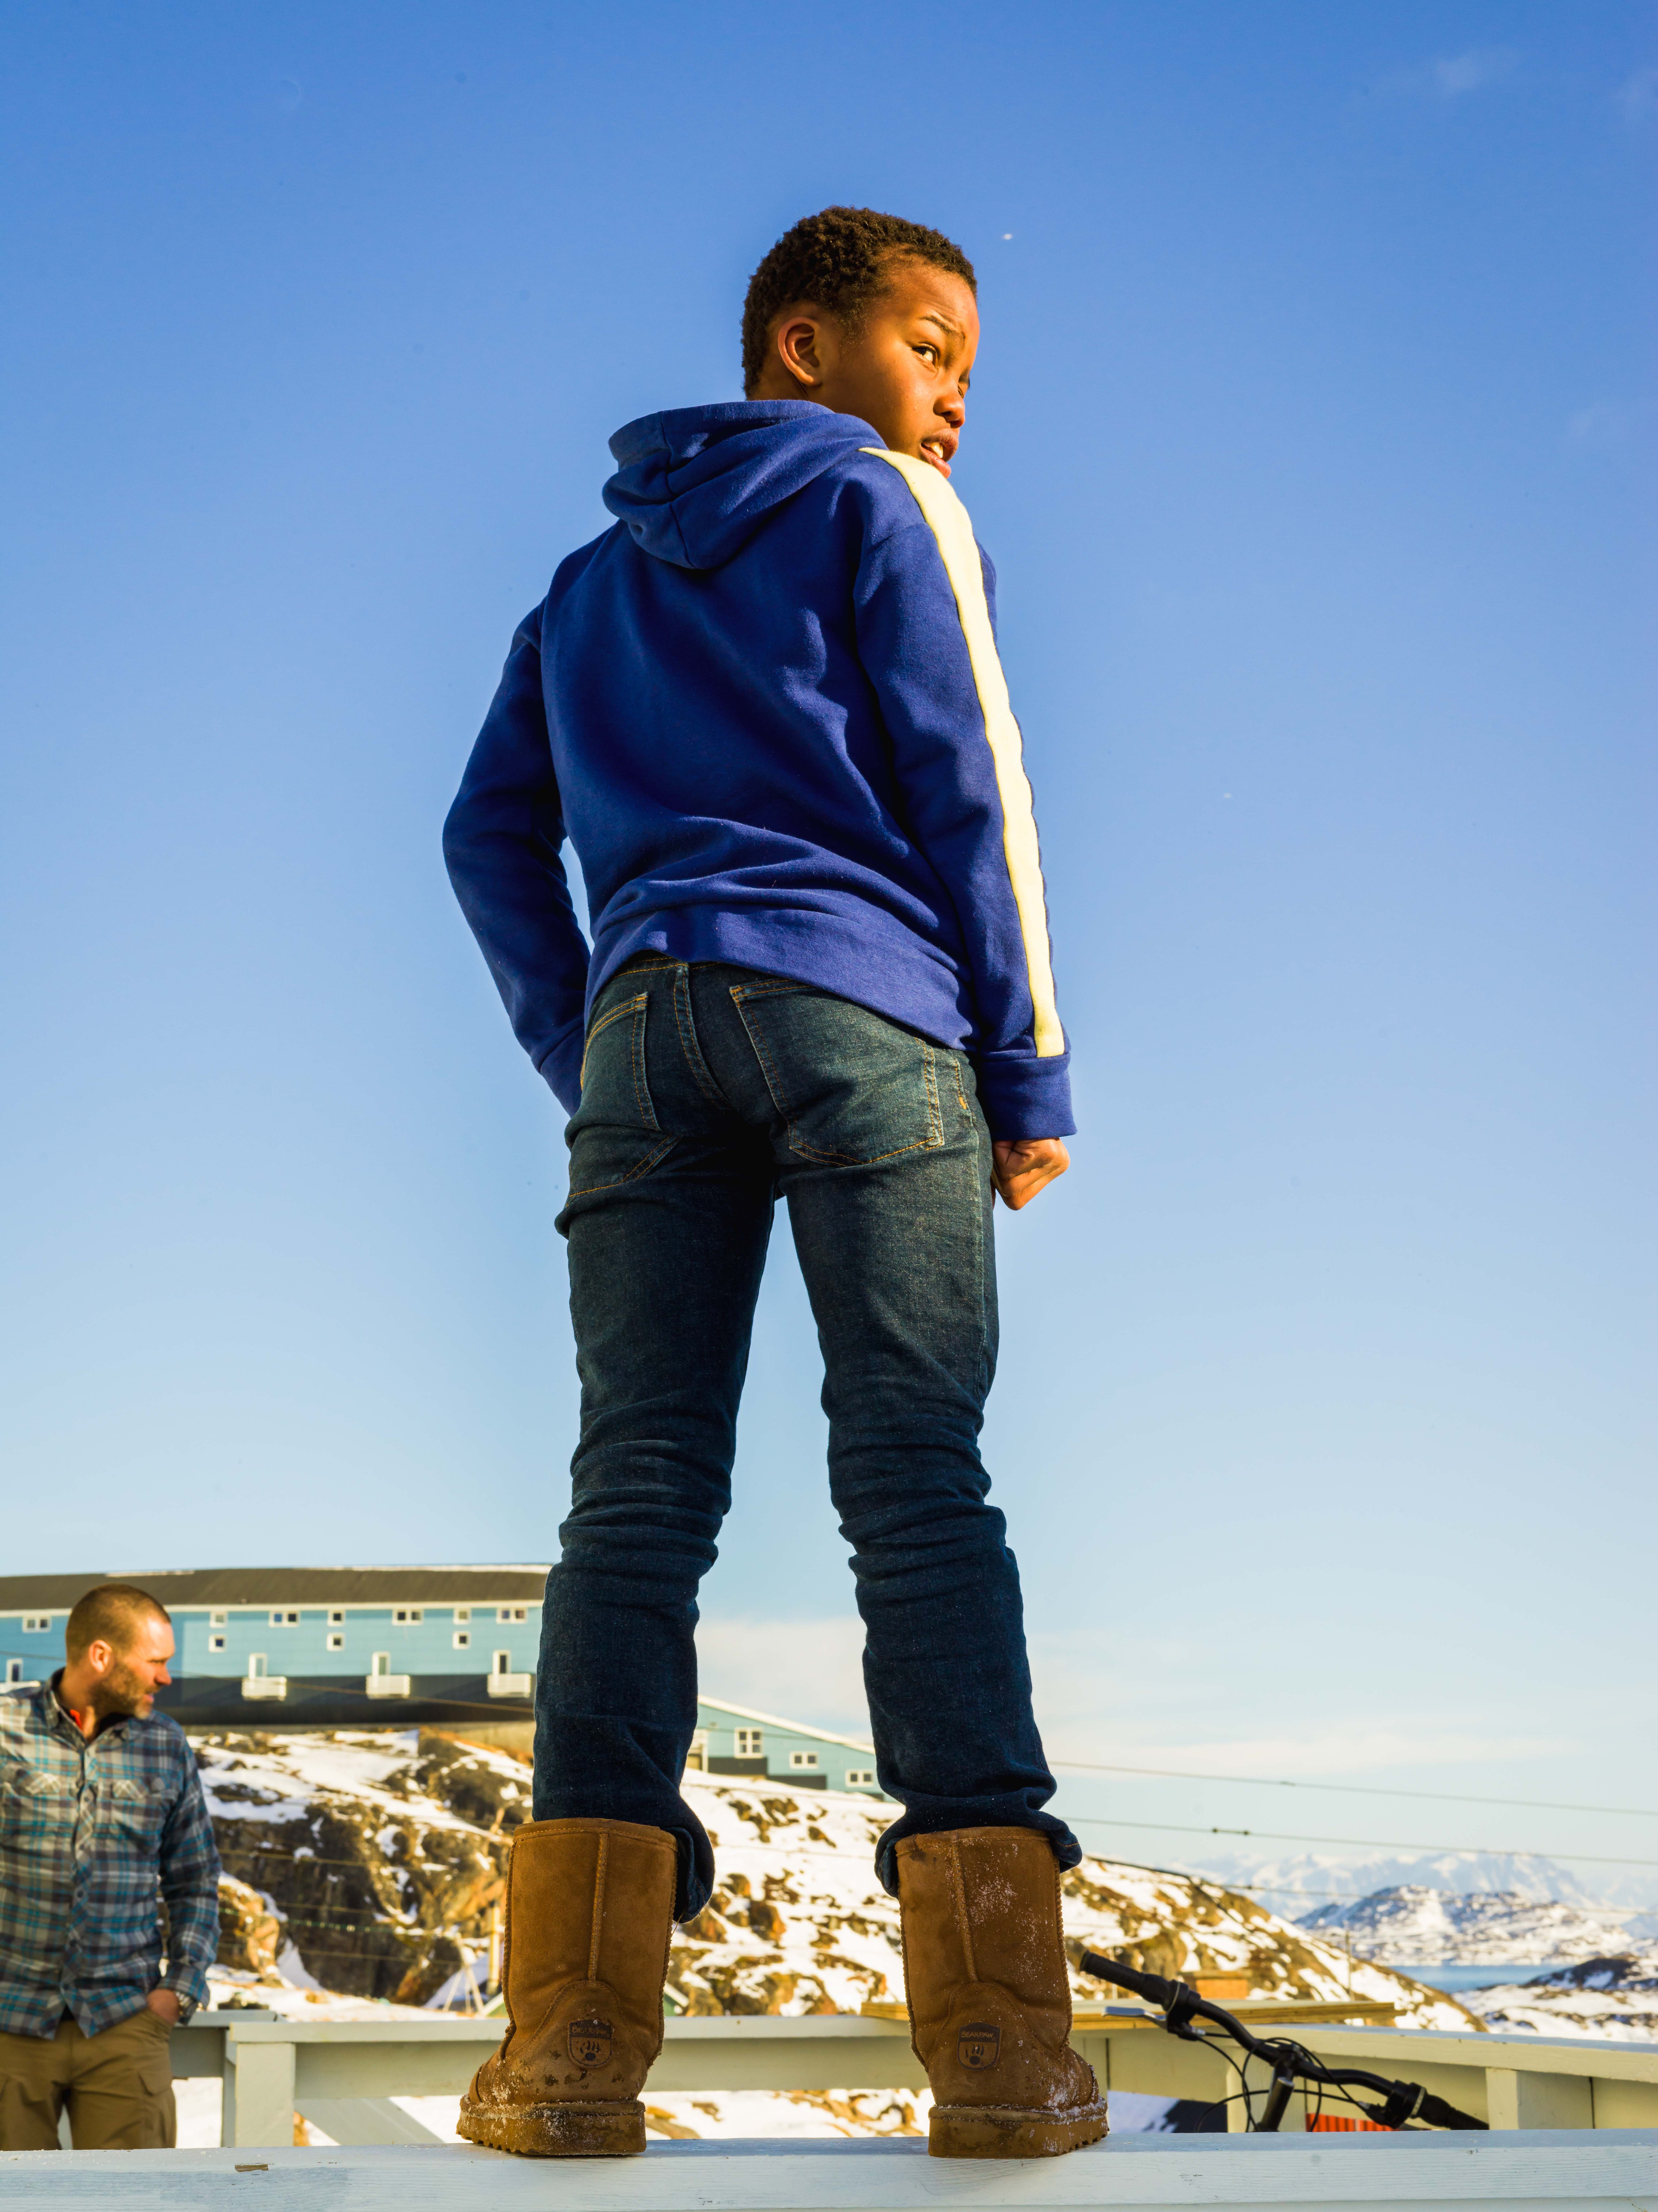 A young boy stands facing away from the camera and gazes over his shoulder. He has dark skin and wears a blue hoodie and jeans.